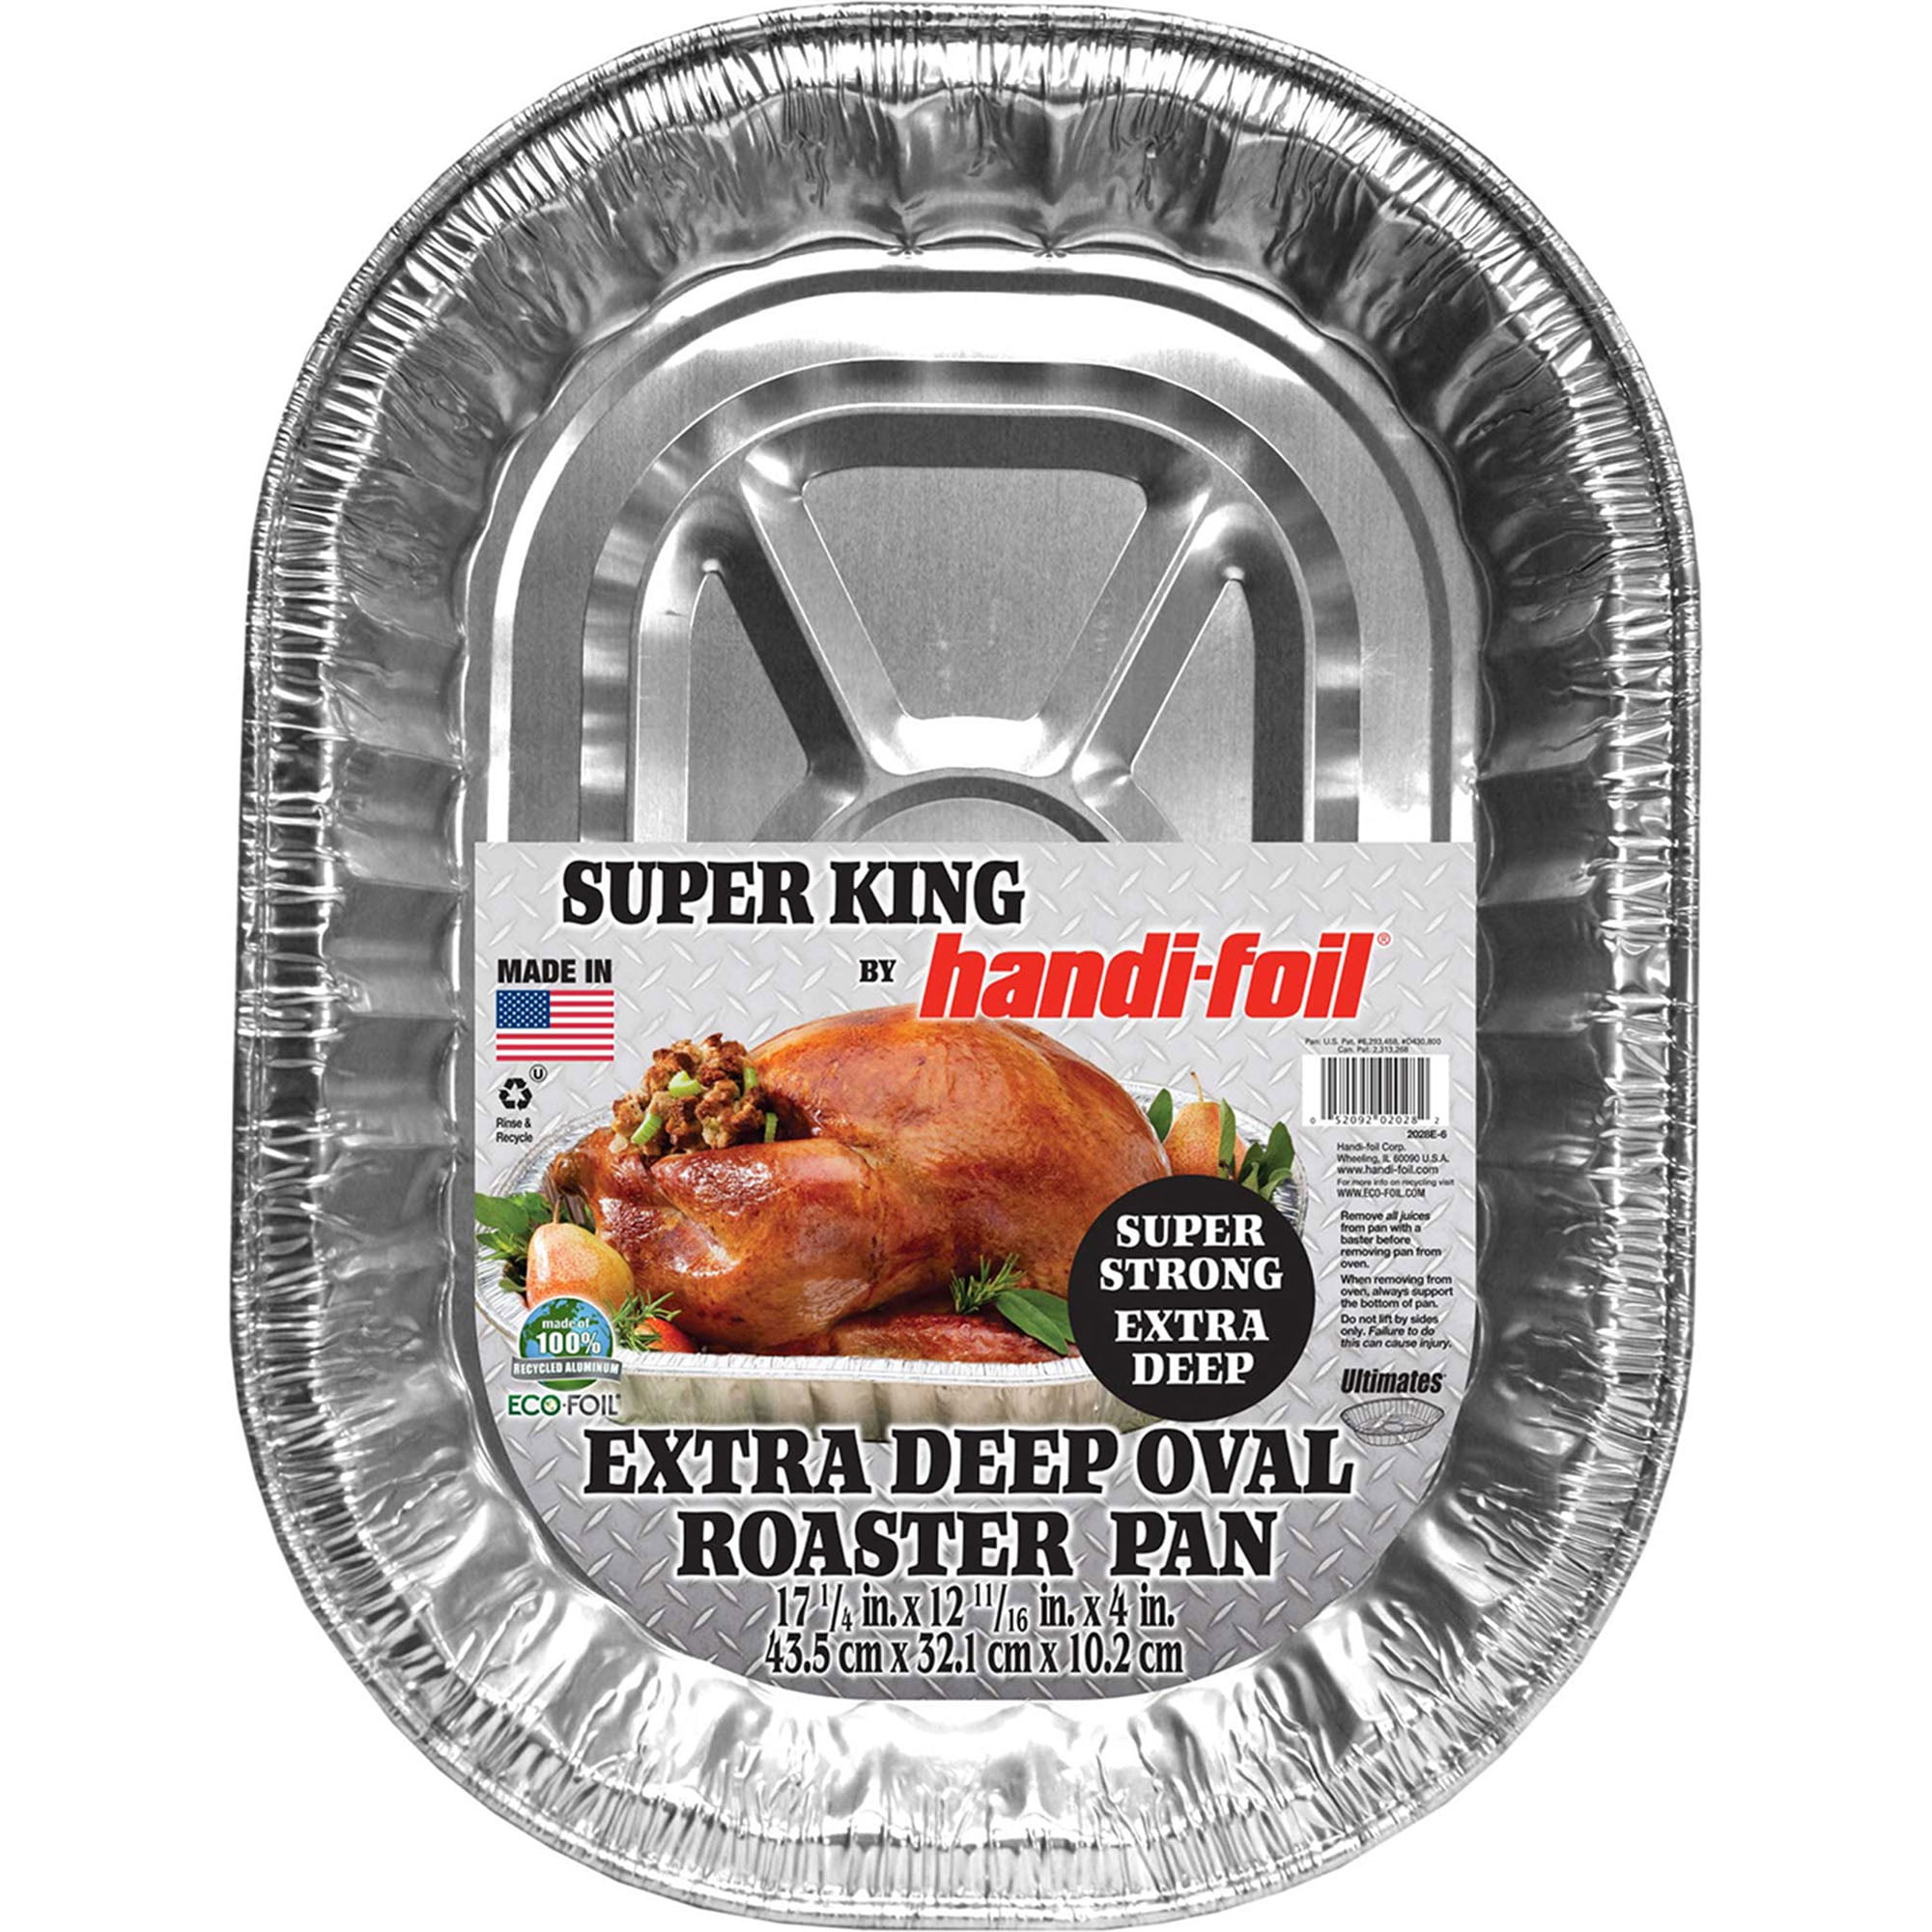 VeZee Disposable Oval Roasting Pan - Durable Turkey Roaster Pans Extra Large,  Heavy-Duty Aluminum Foil, Deep, Oval Shape for Chicken, Meat, Brisket,  Roasting, Baking, Recyclable: 200 Pans 